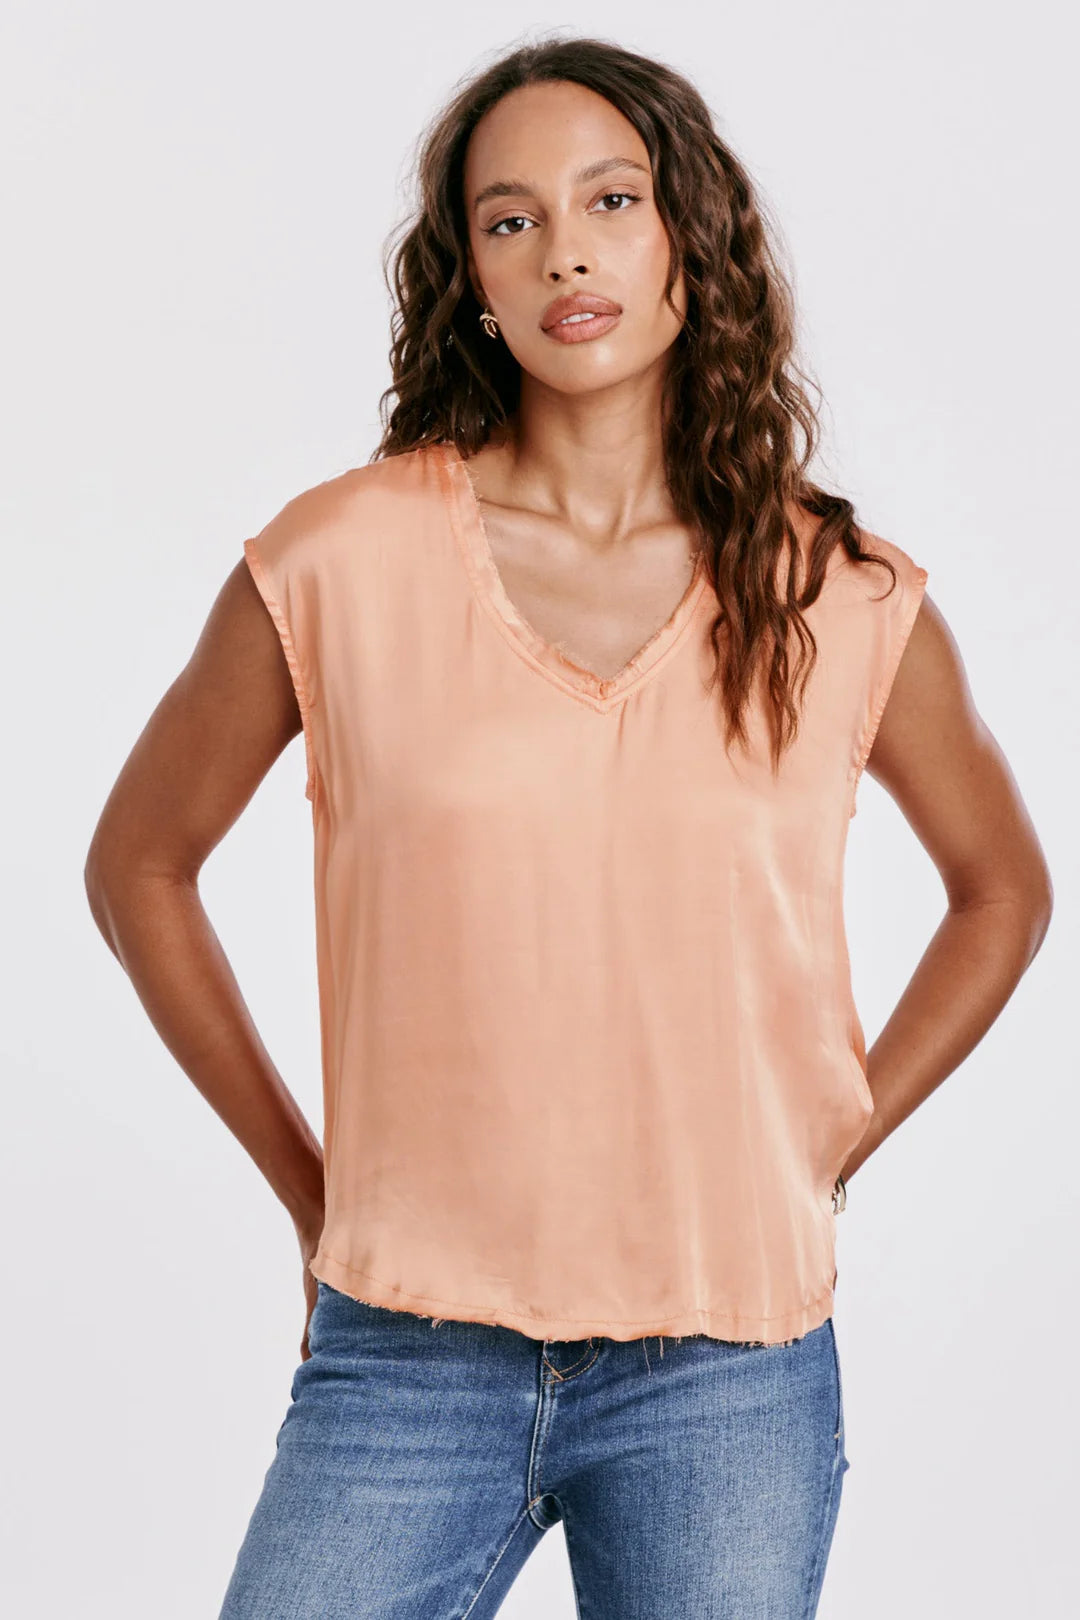 Silky Top Apricot Crush